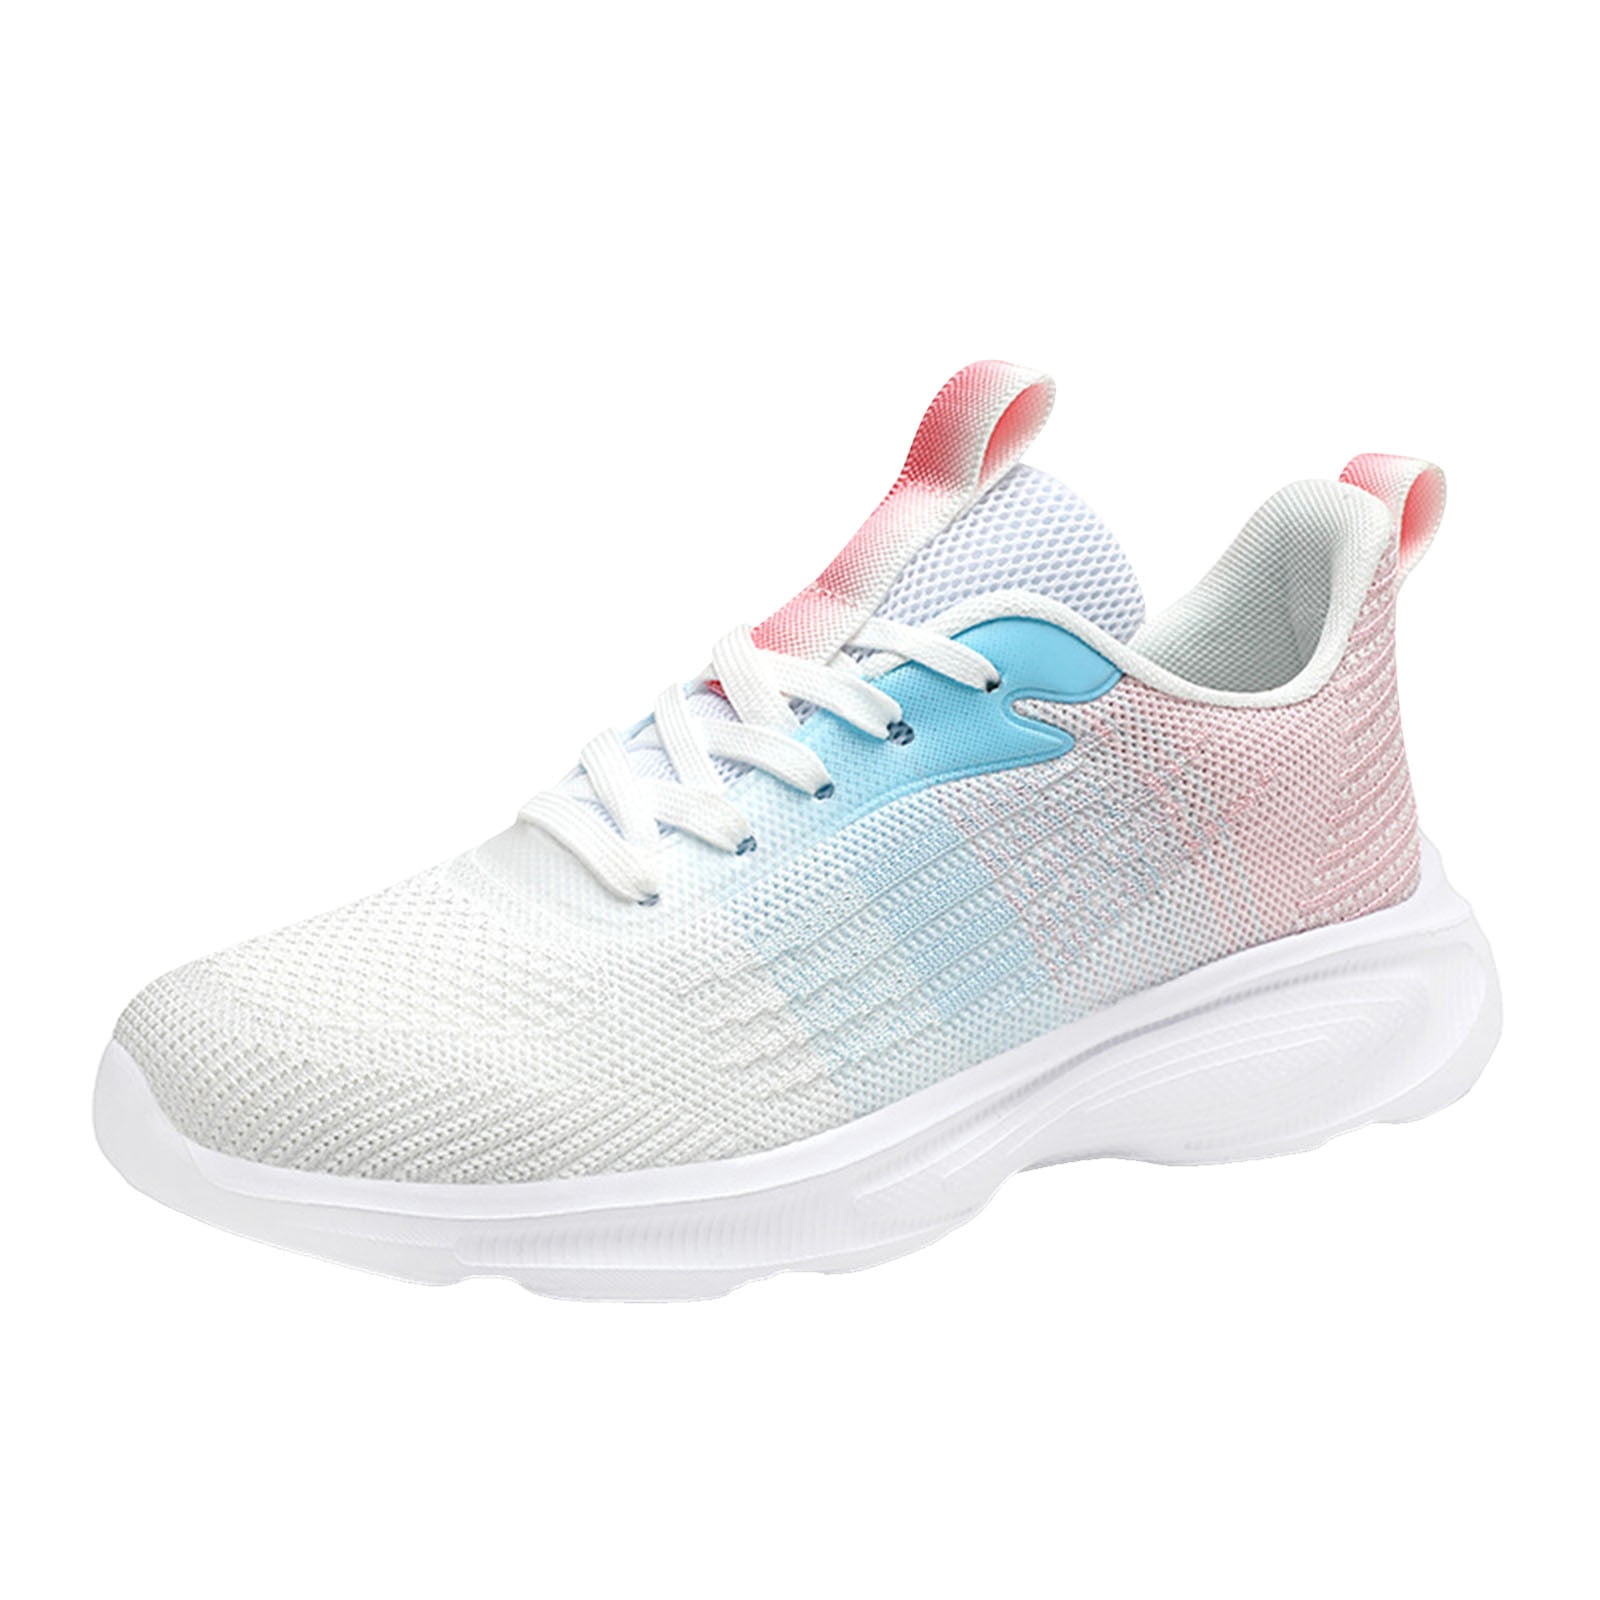 ZIZOCWA Breathable Mesh Workout Shoes for Women Gradient Color Sneakers ...